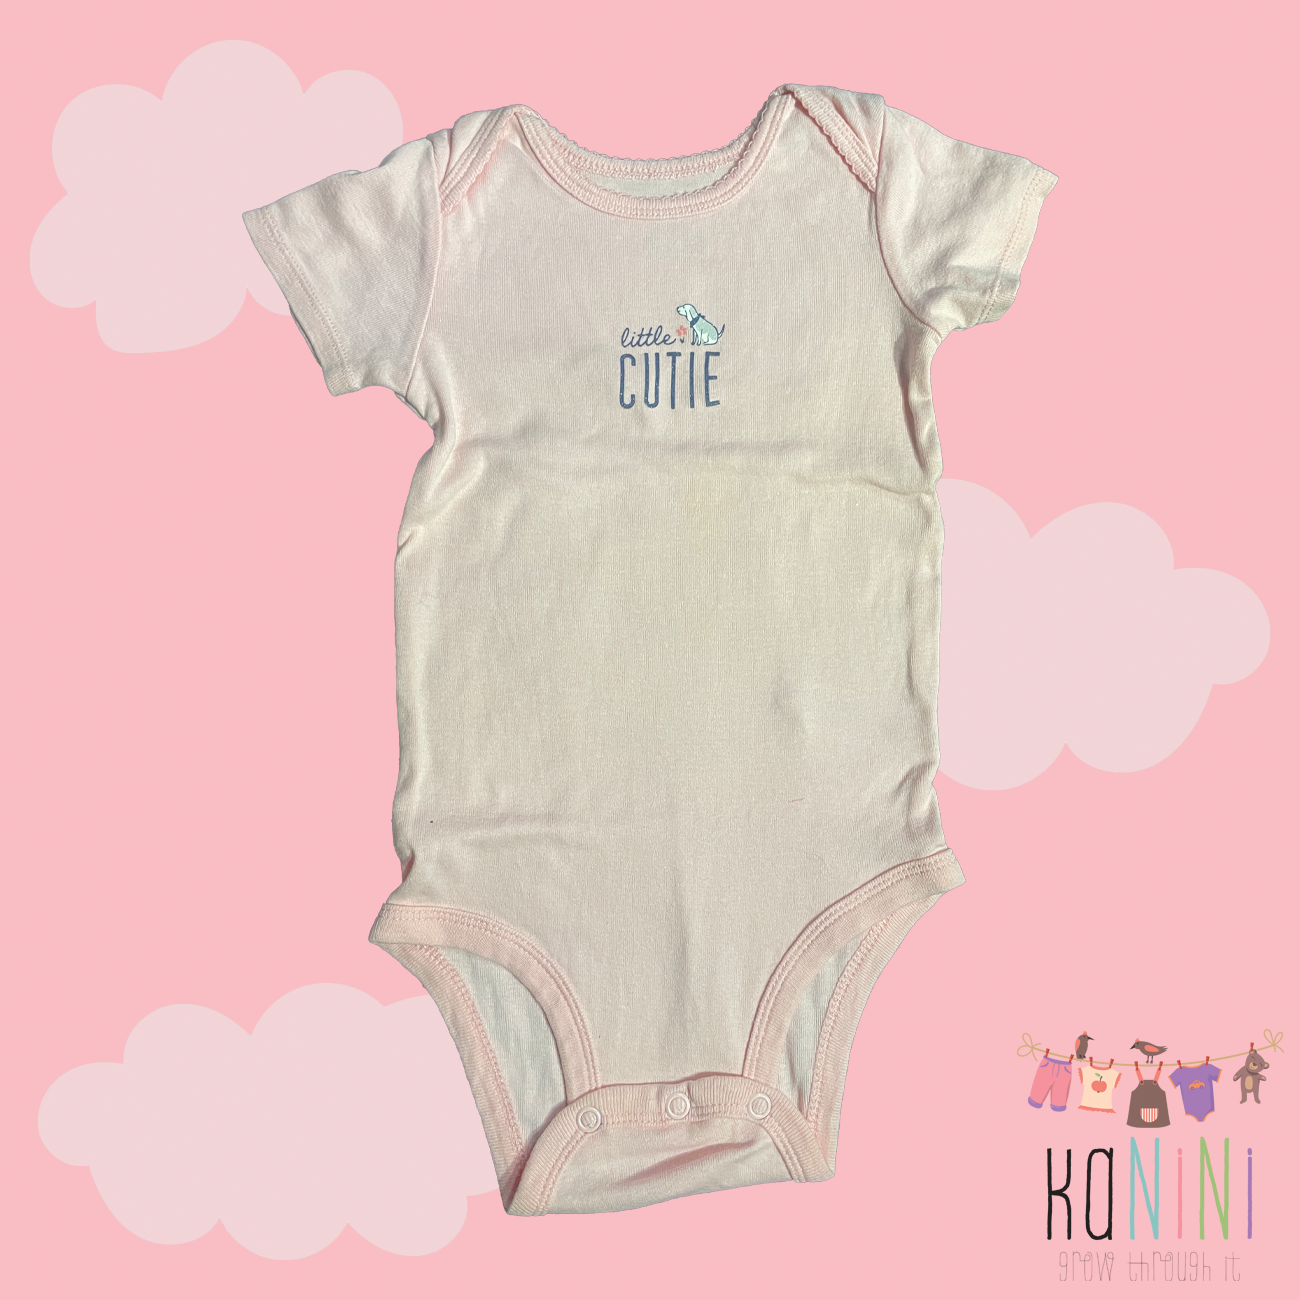 Featured image for “Carter's 18 Months Girls Short Sleeve Romper”